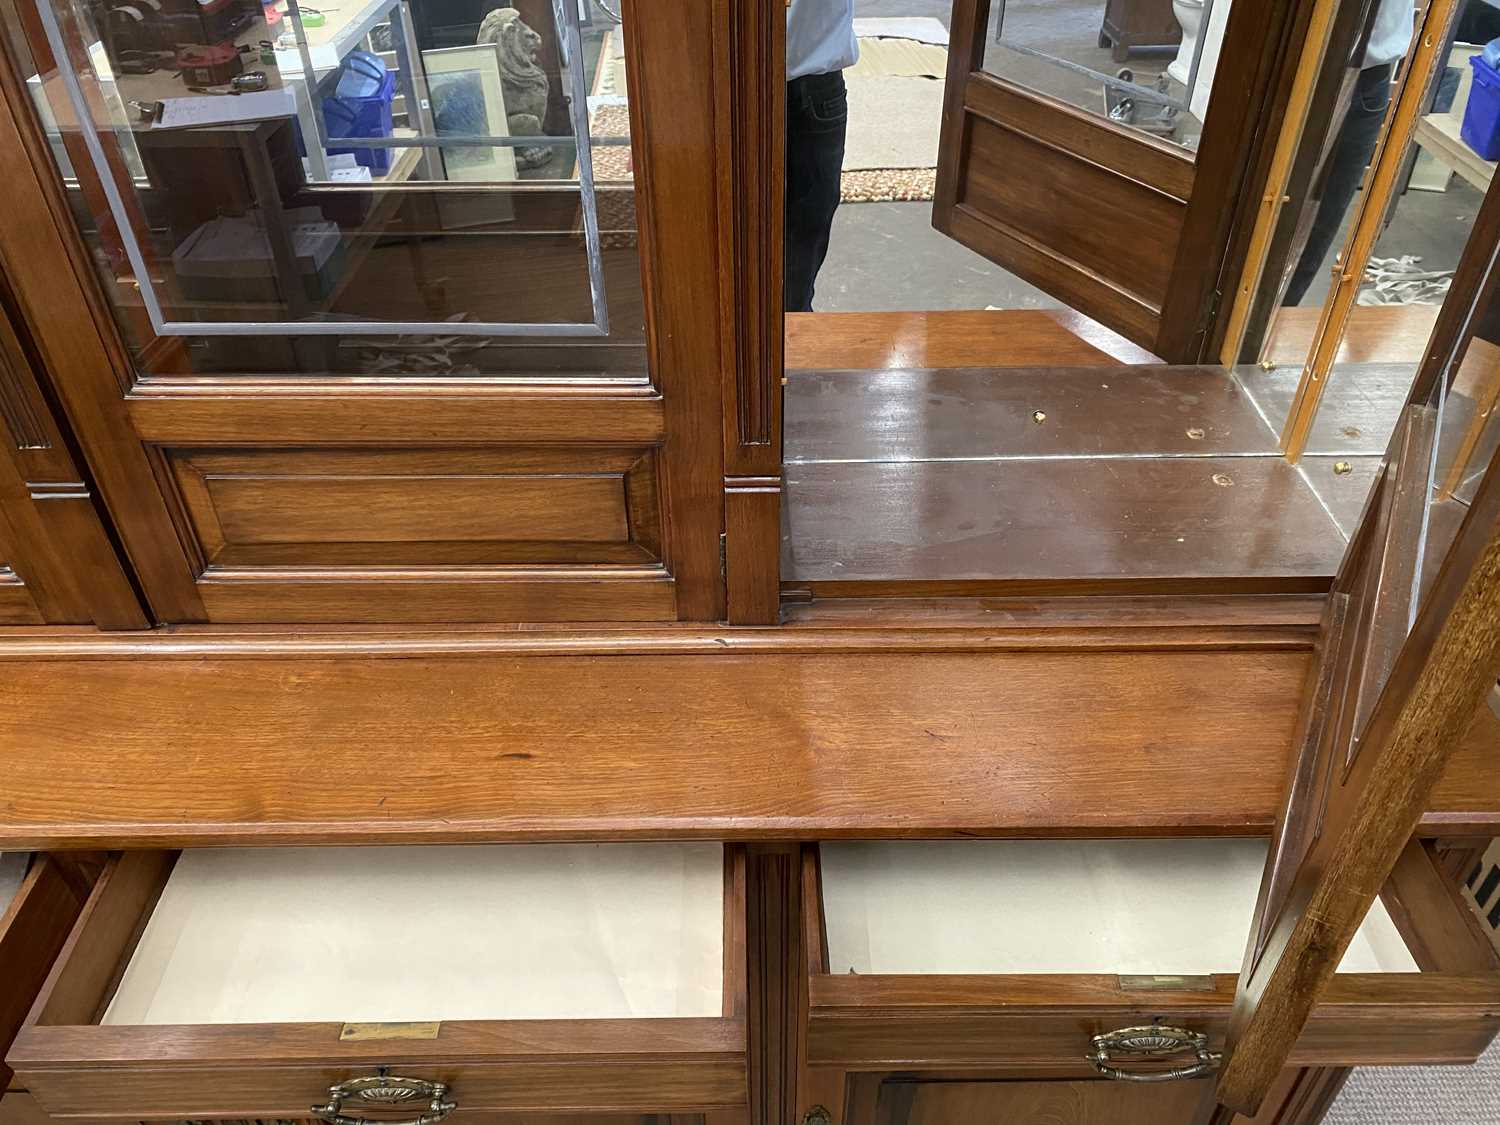 EXCELLENT EDWARDIAN MAHOGANY BOOKCASE CUPBOARD, having a balustrade gallery top with leaf and - Image 2 of 3